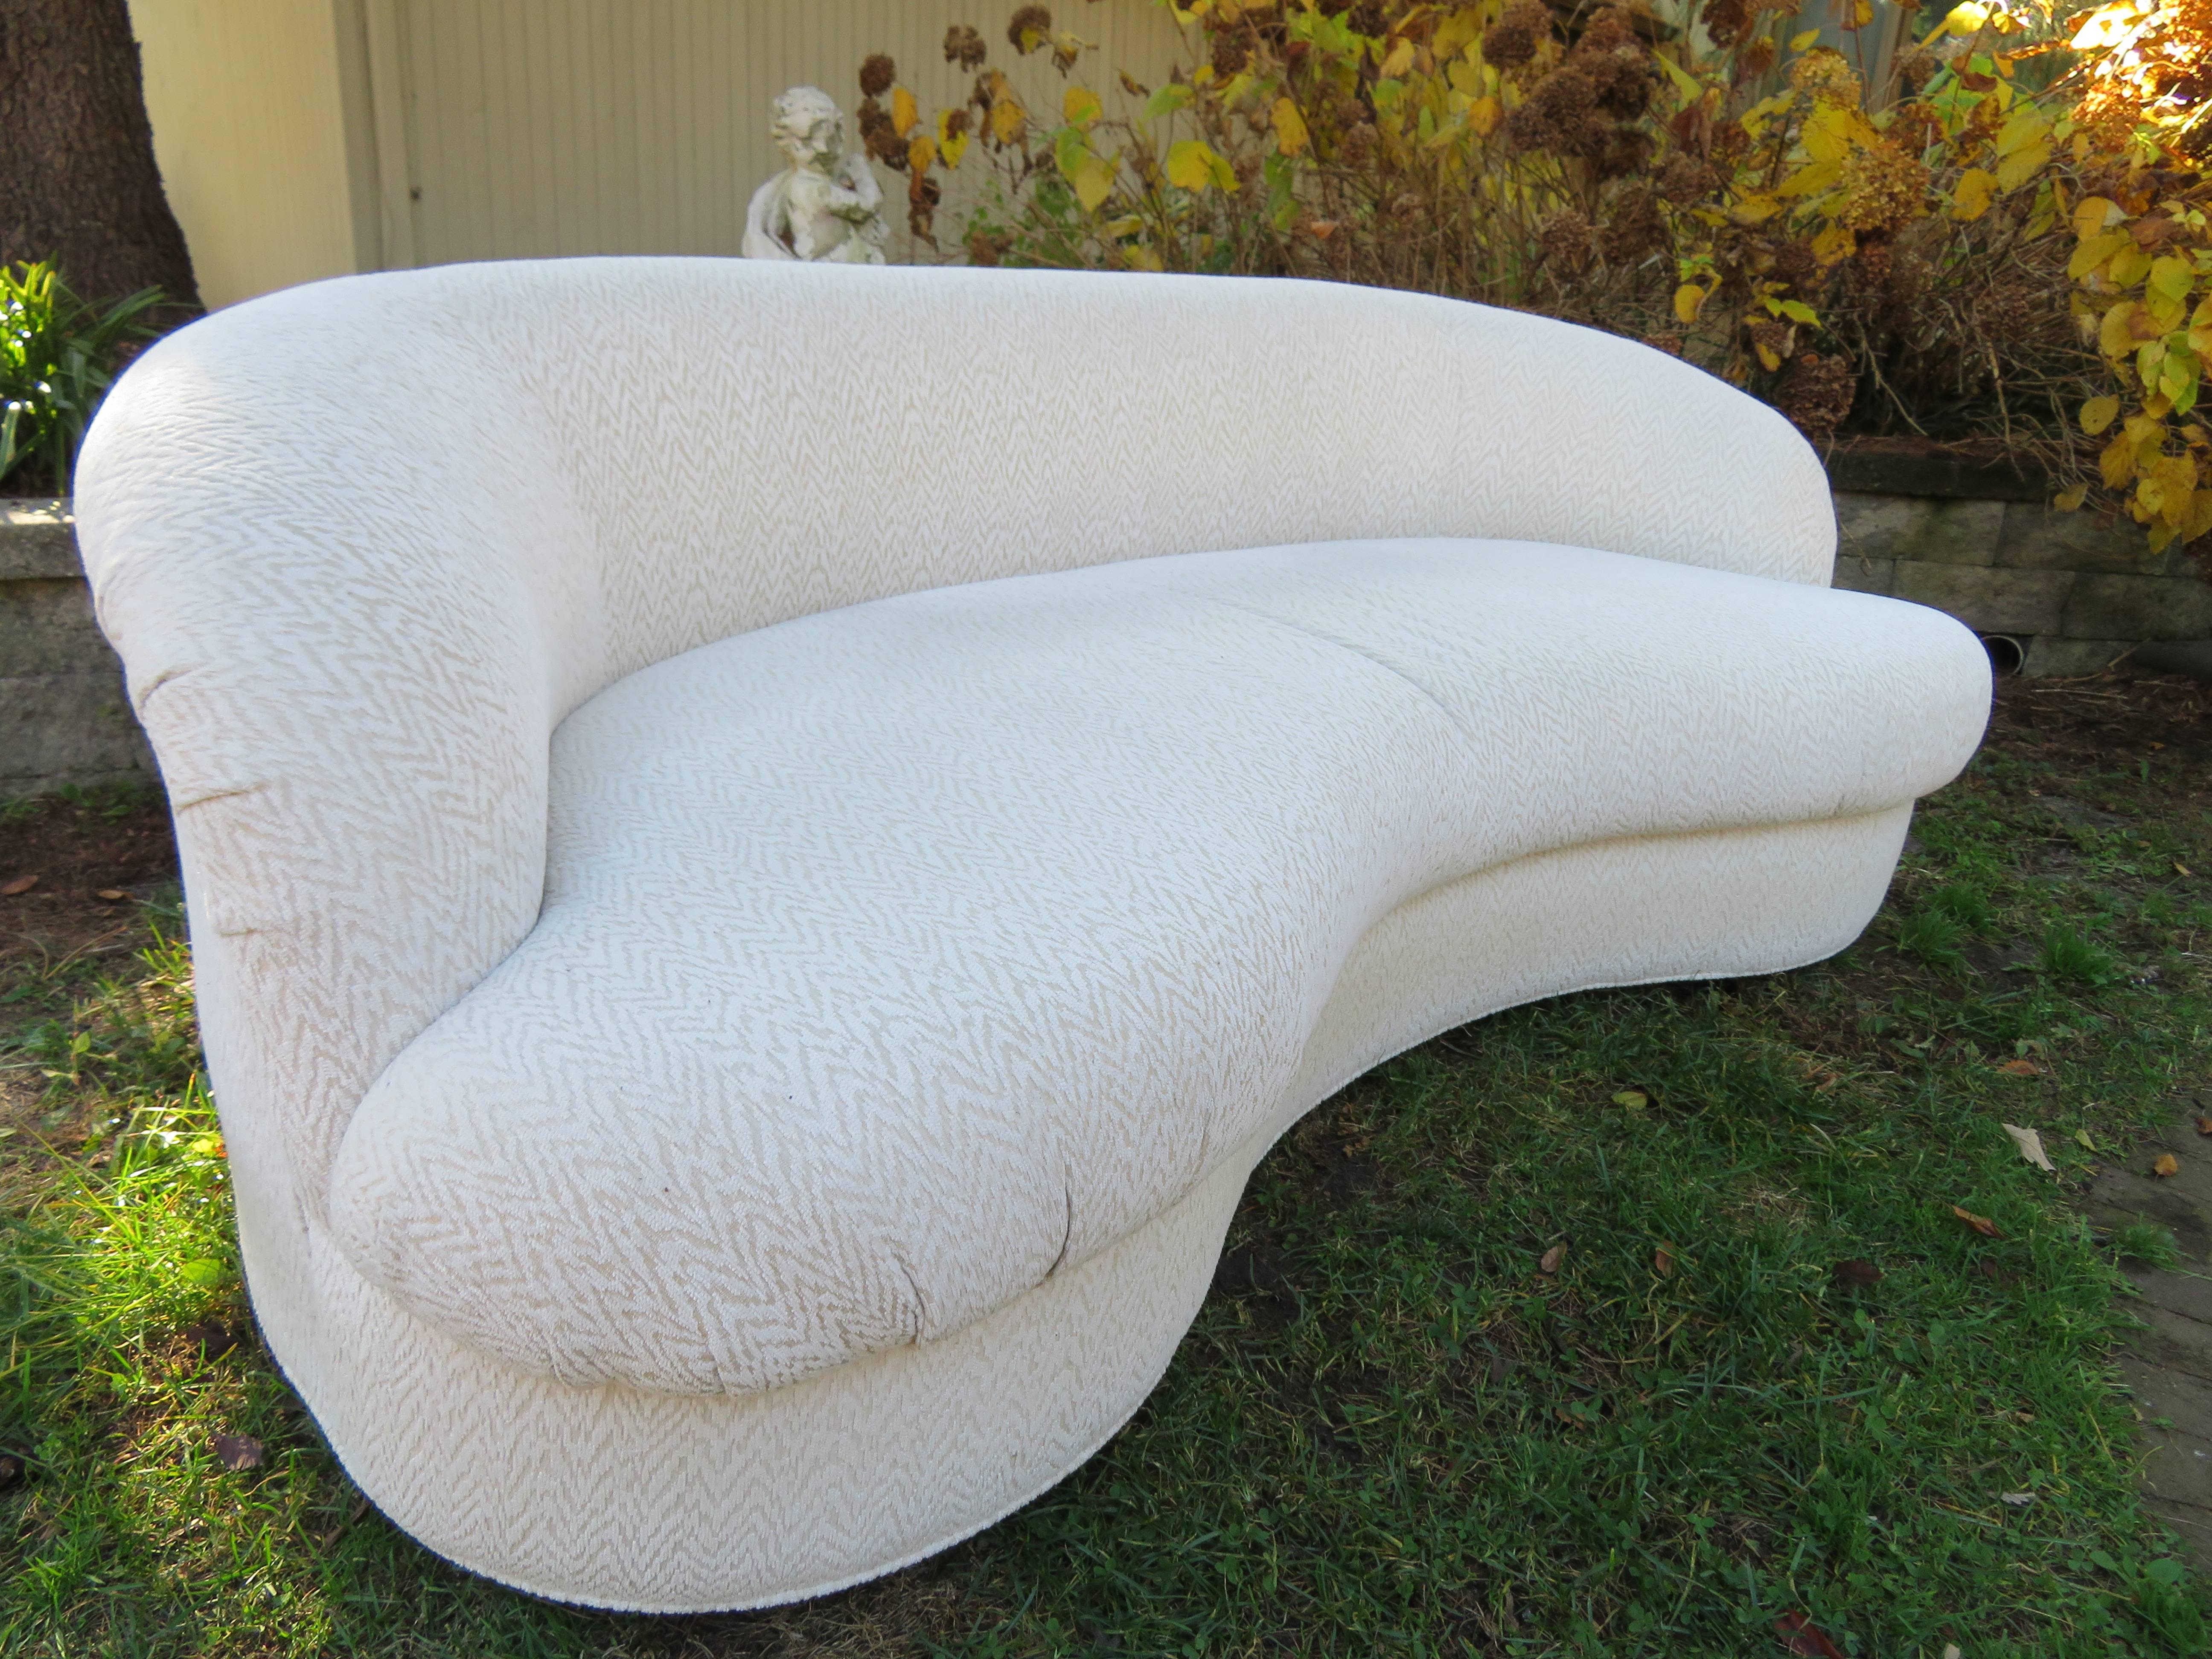 Excellent pair of kidney shaped sofas-Vladimir Kagan style. This pair is super clean and in excellent condition.